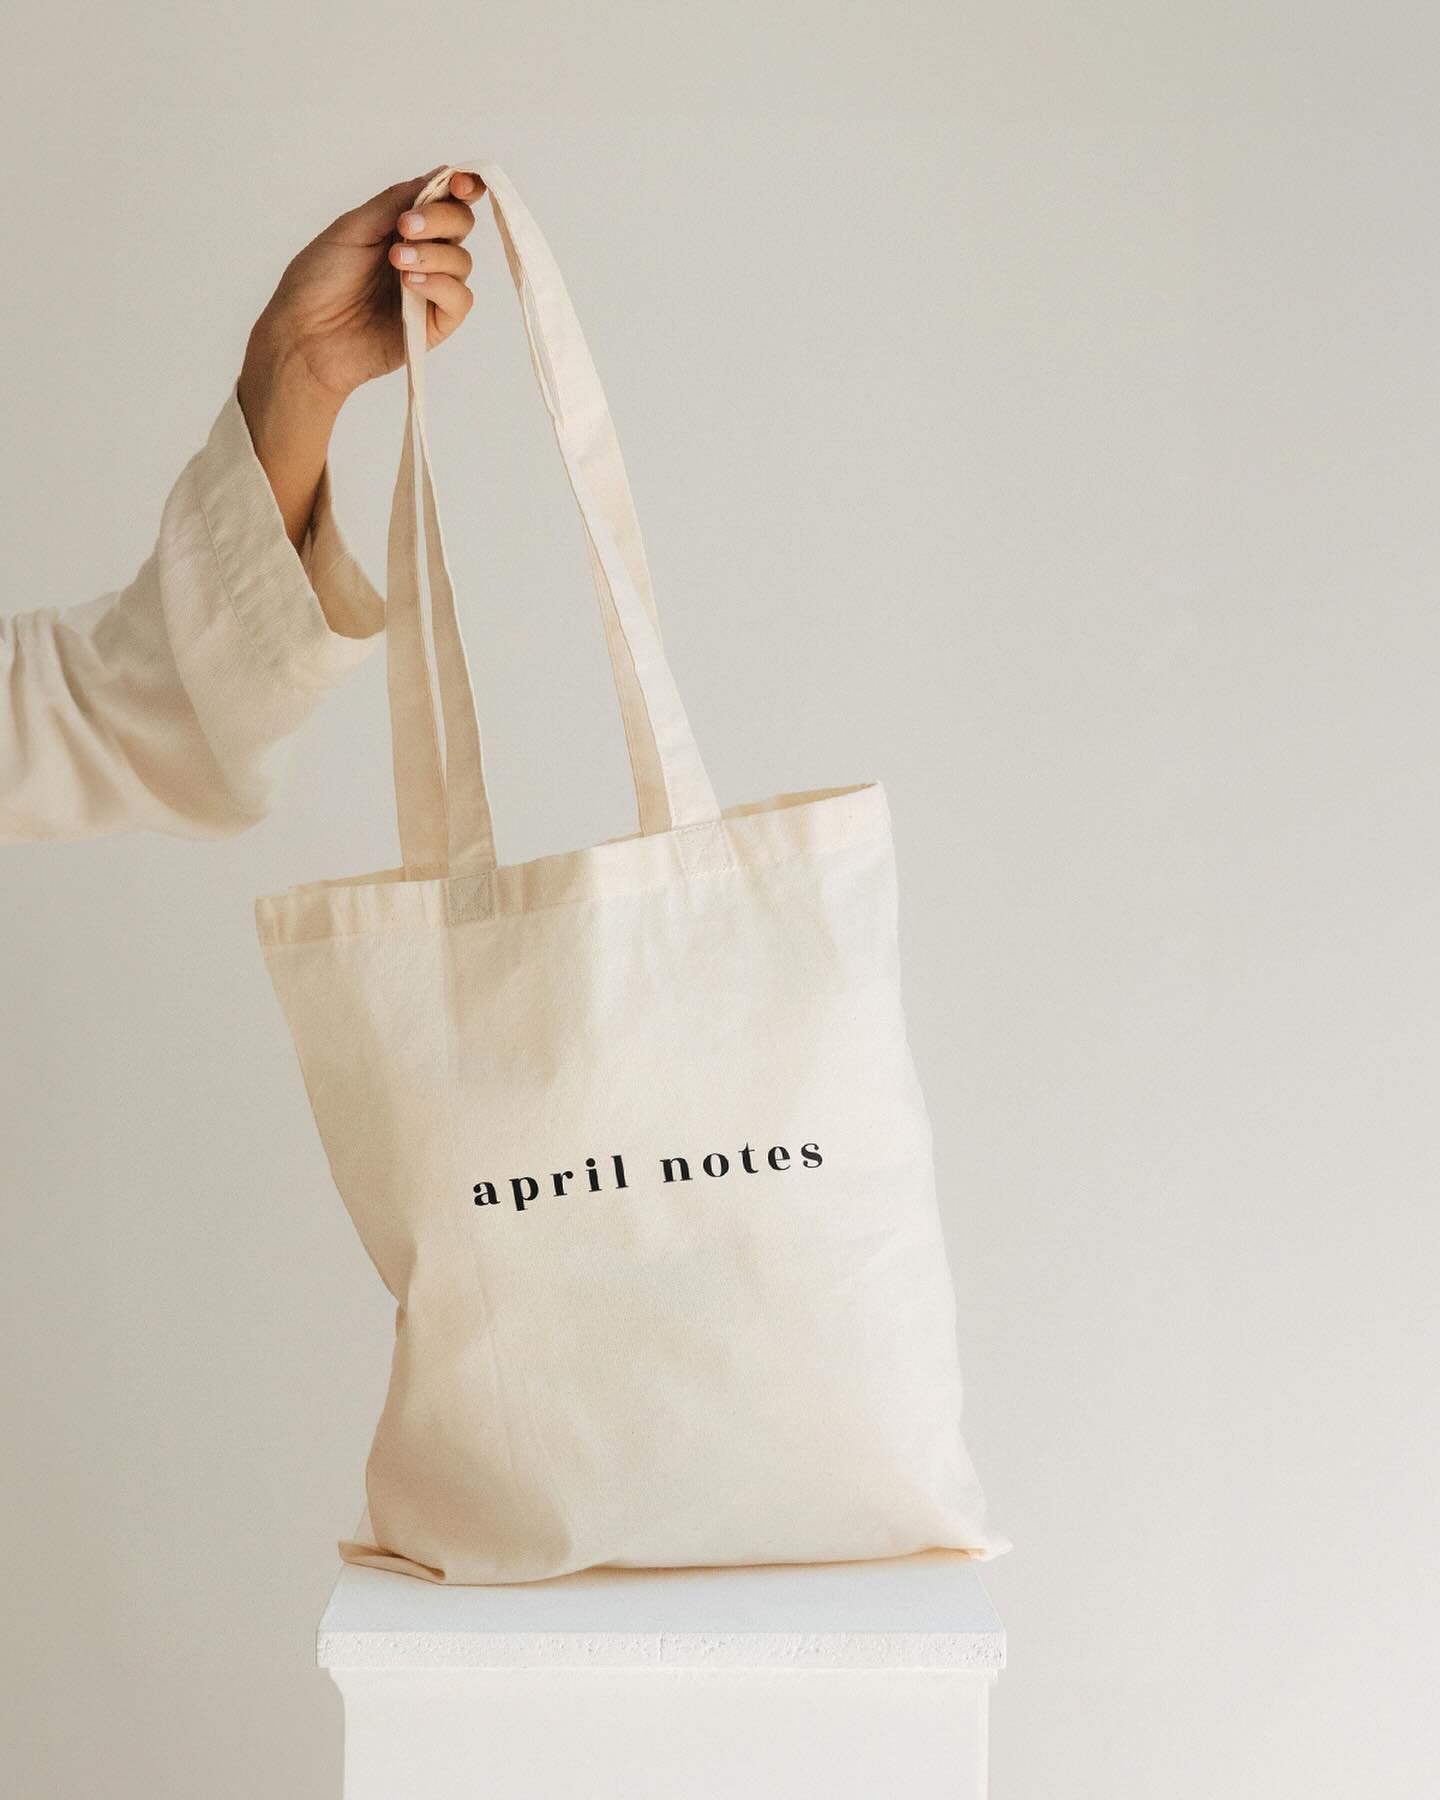 One of the old, but still one of the most favorite projects - brand design for the April Notes. It is a sustainable e-commerce brand, that produing high-quality home textiles ✨🤍

I was happy to help April Notes to launch, by providing a branding kit